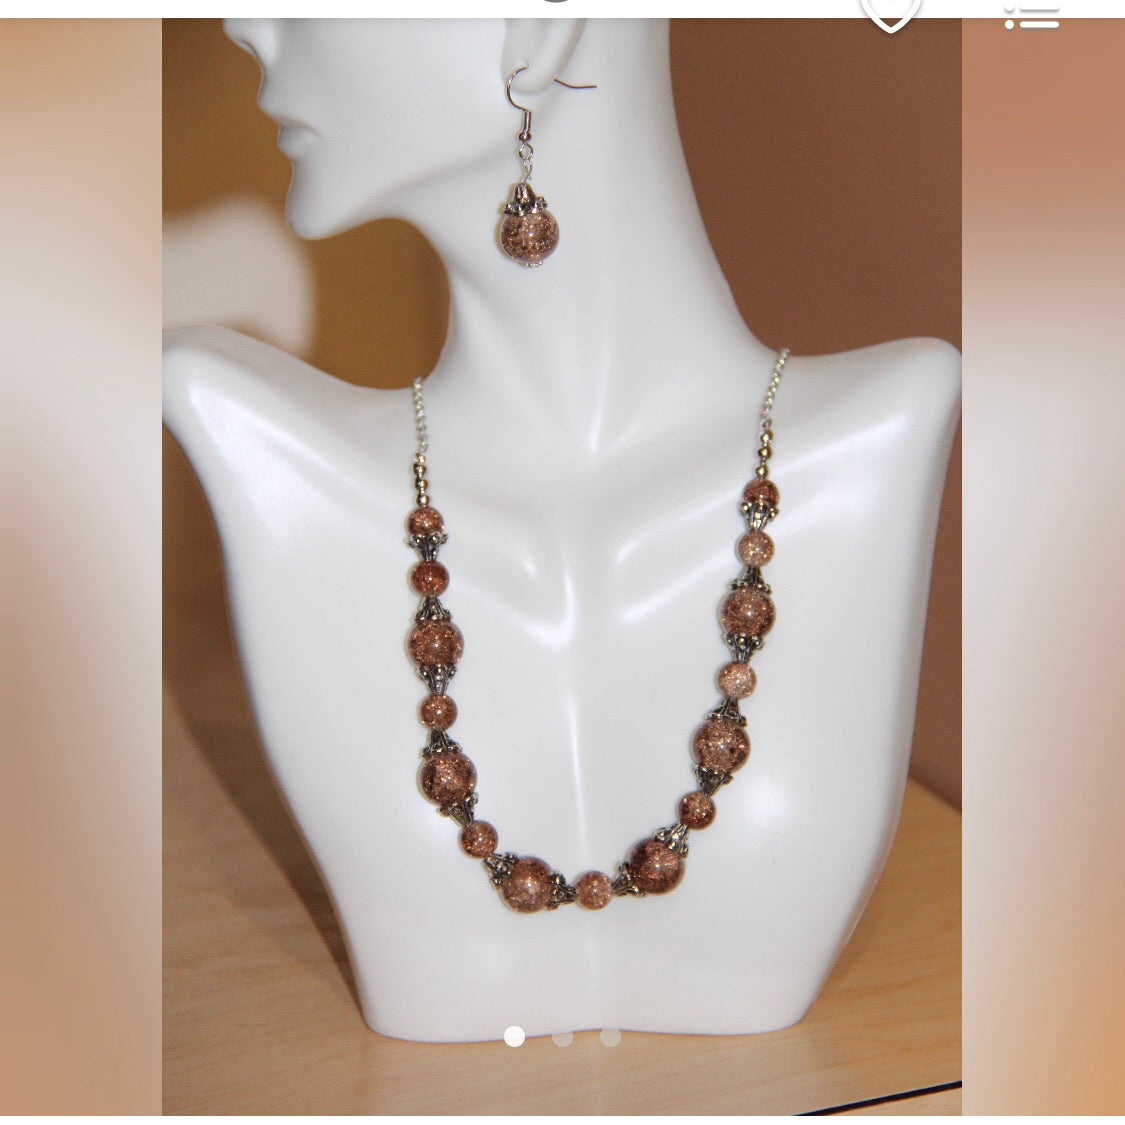 Crackle glass beads necklace set